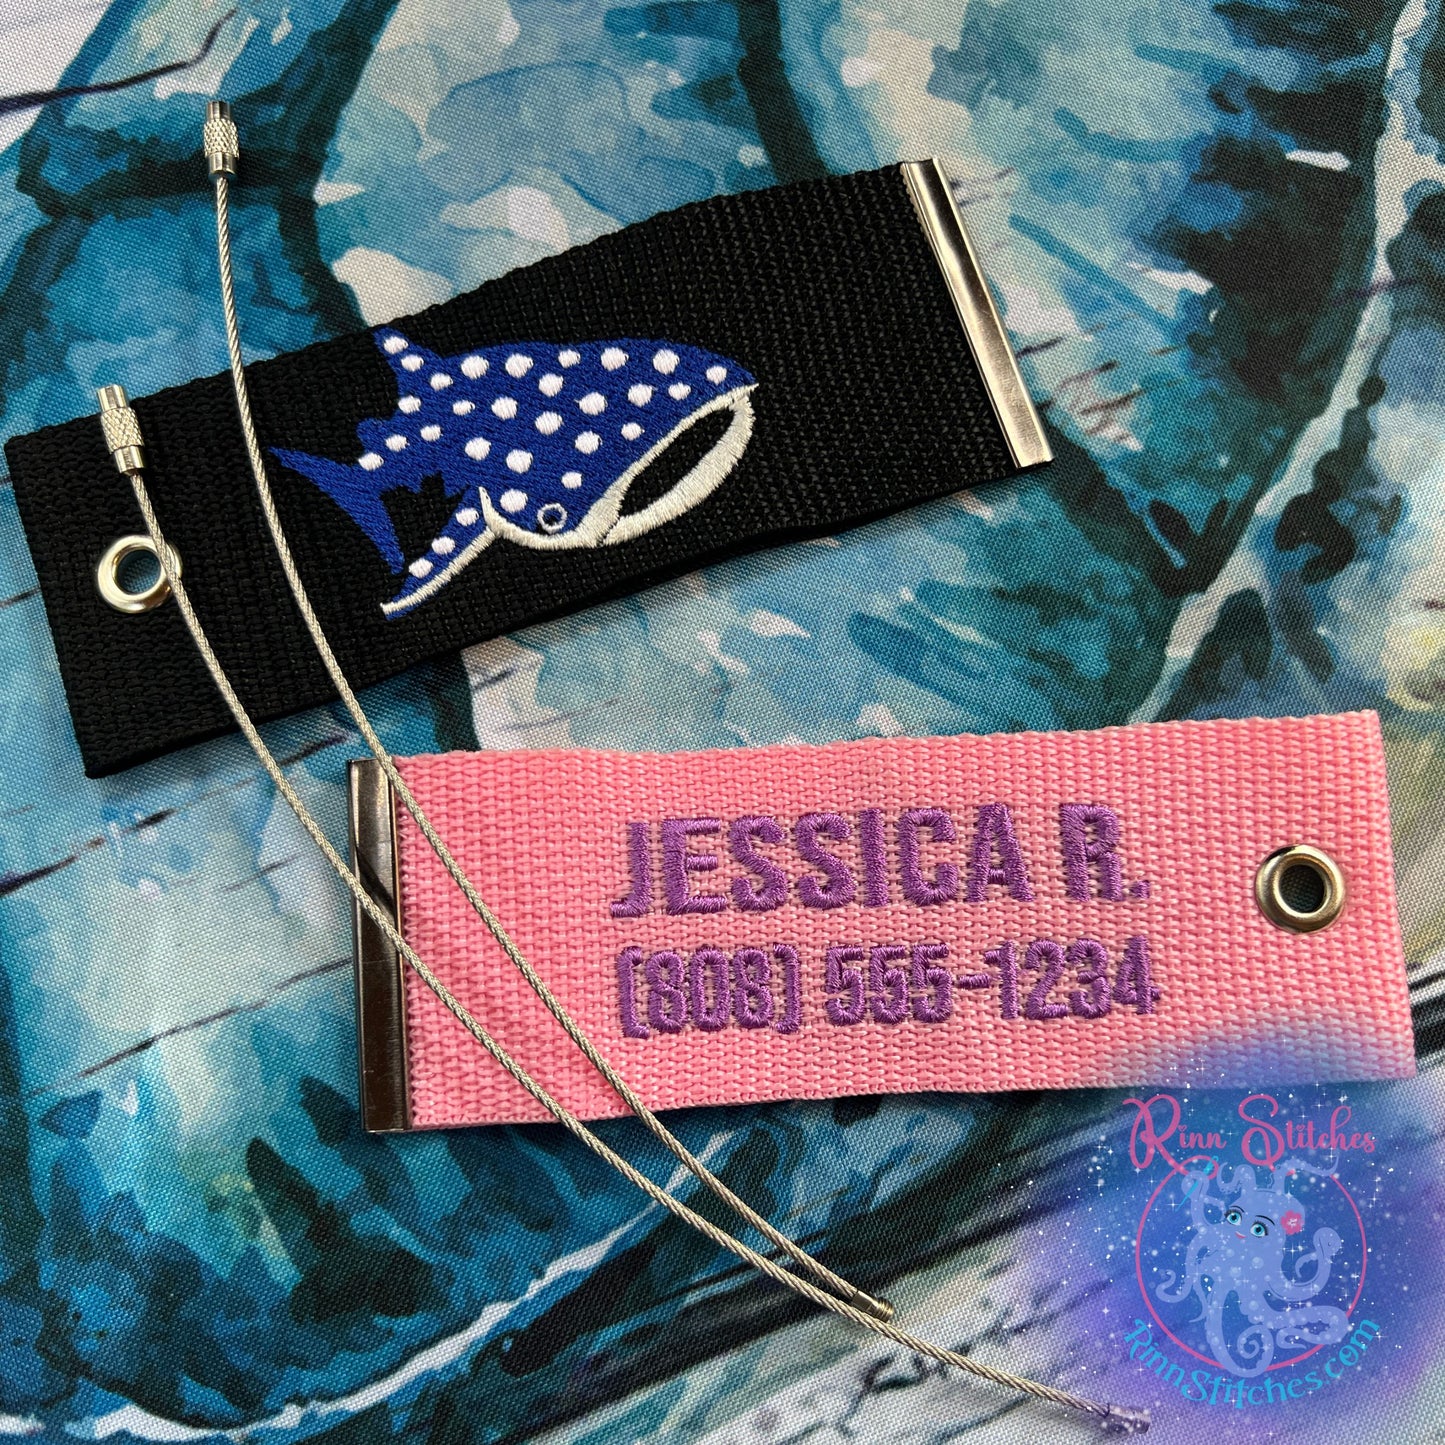 Jellyfish Luggage Tag, Personalized Embroidered Bag Tag for all your Travel needs